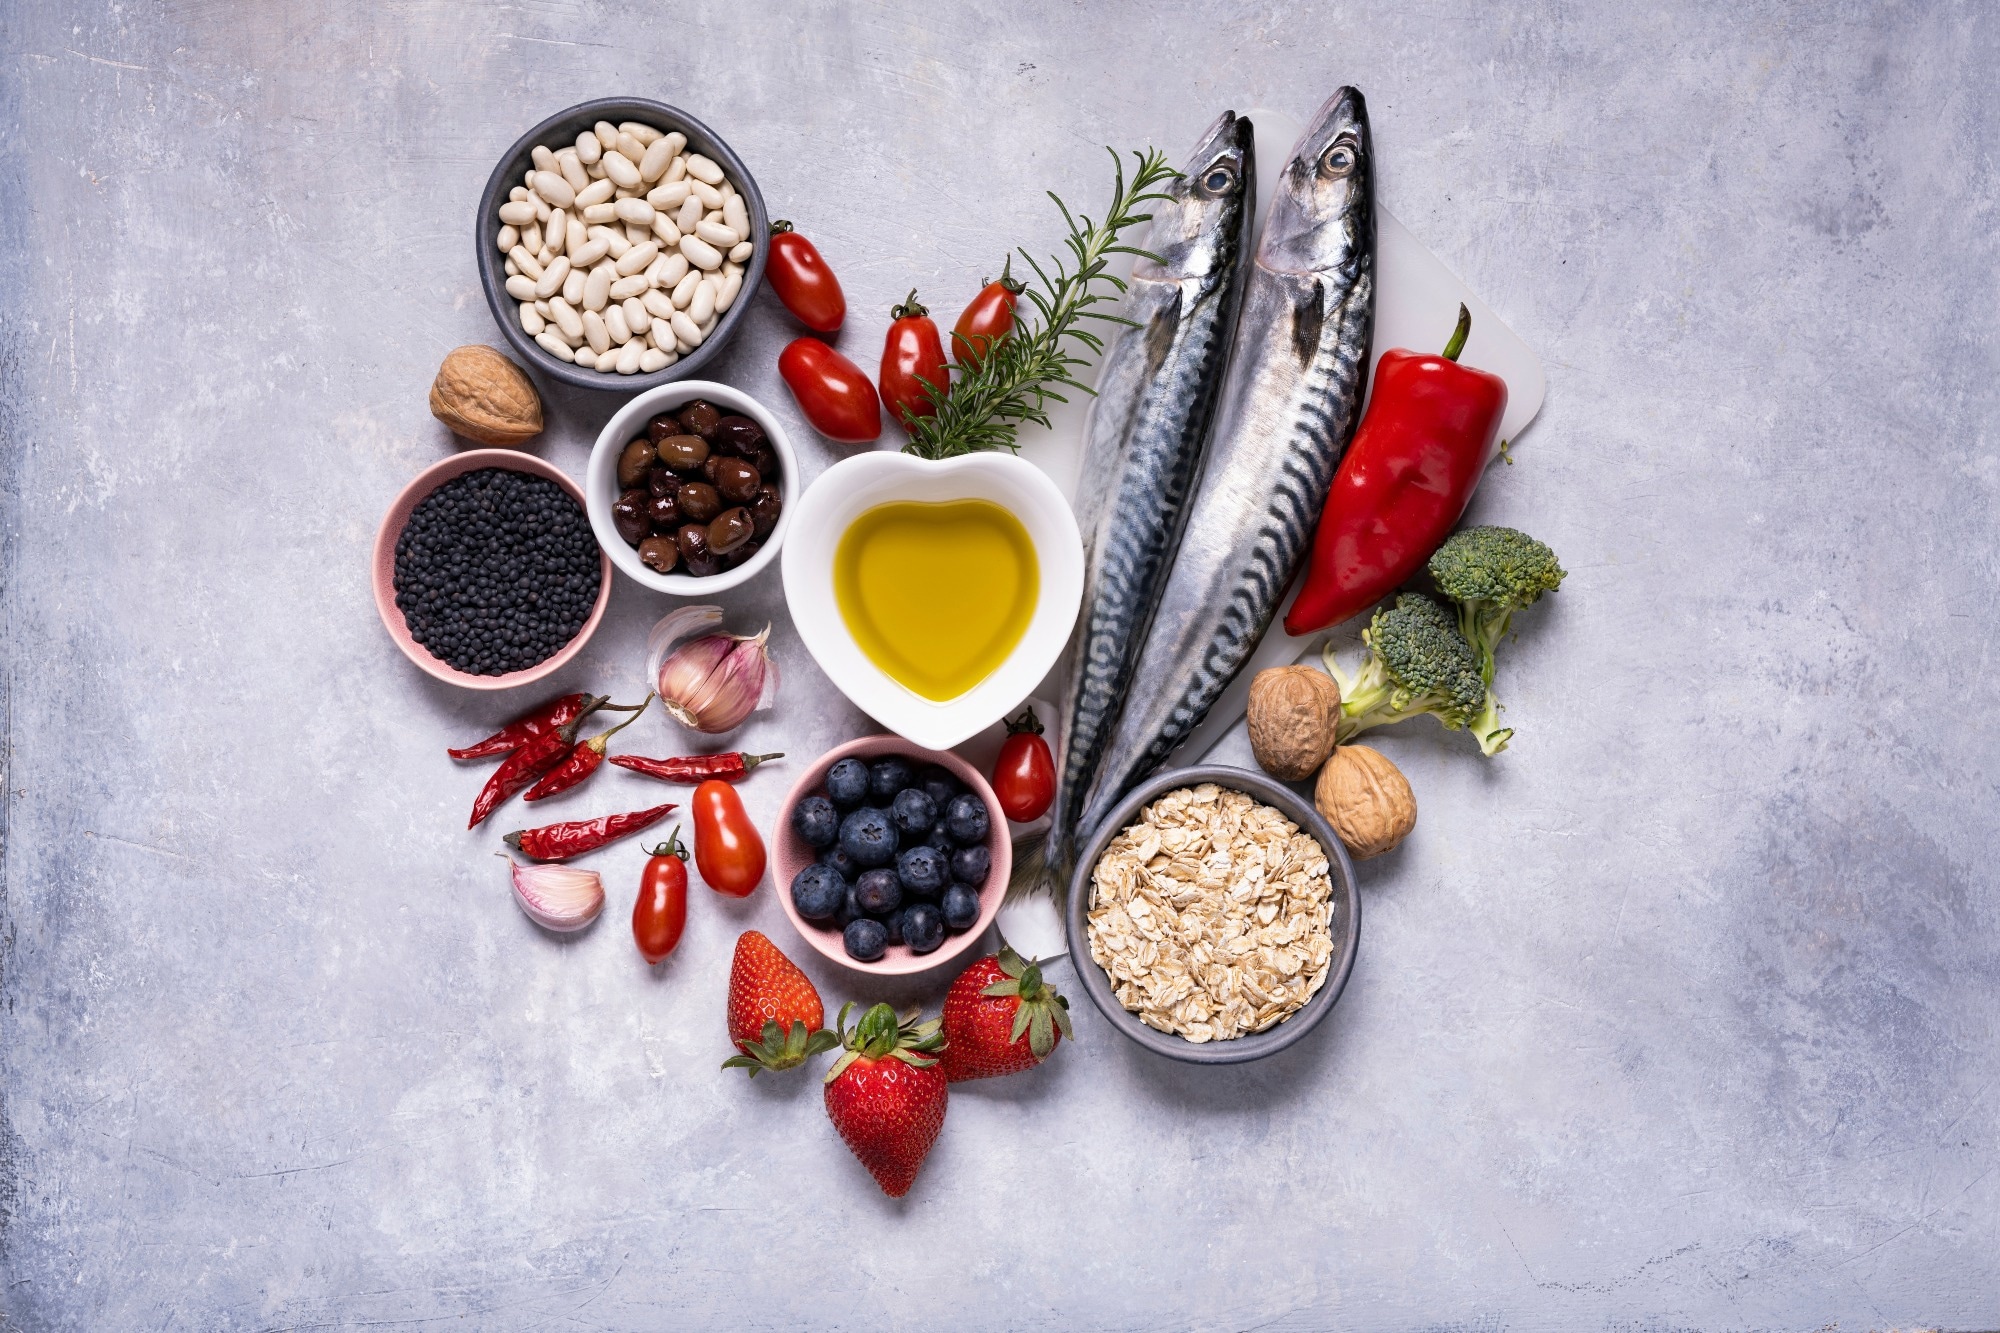 mediterranean diet linked to lower dementia risk, finds extensive review